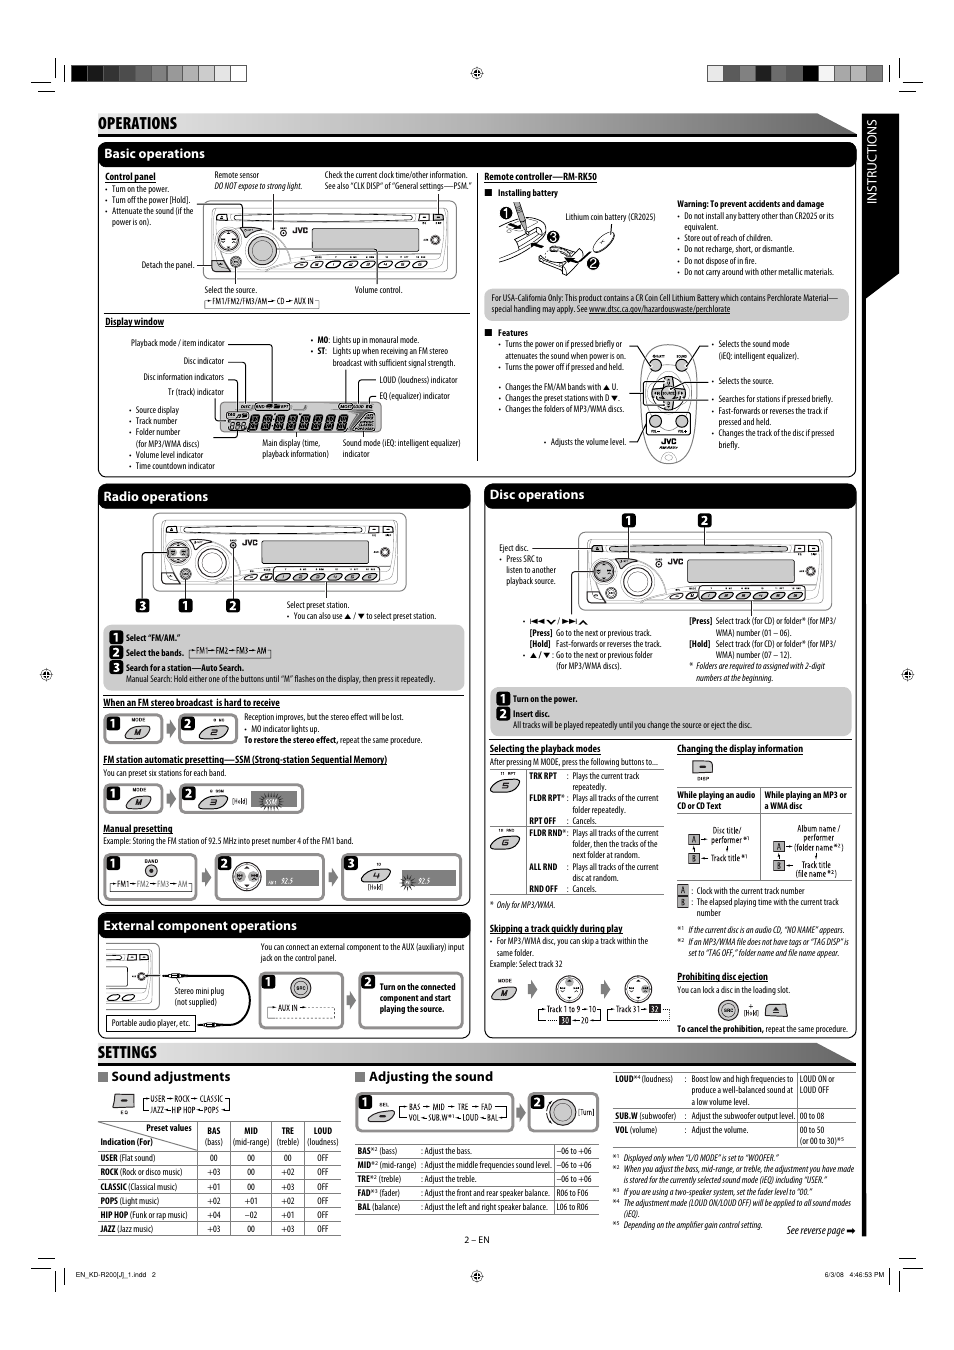 Operations, Settings, Instructions sound adjustments | JVC KD-R200 User  Manual | Page 2 / 4